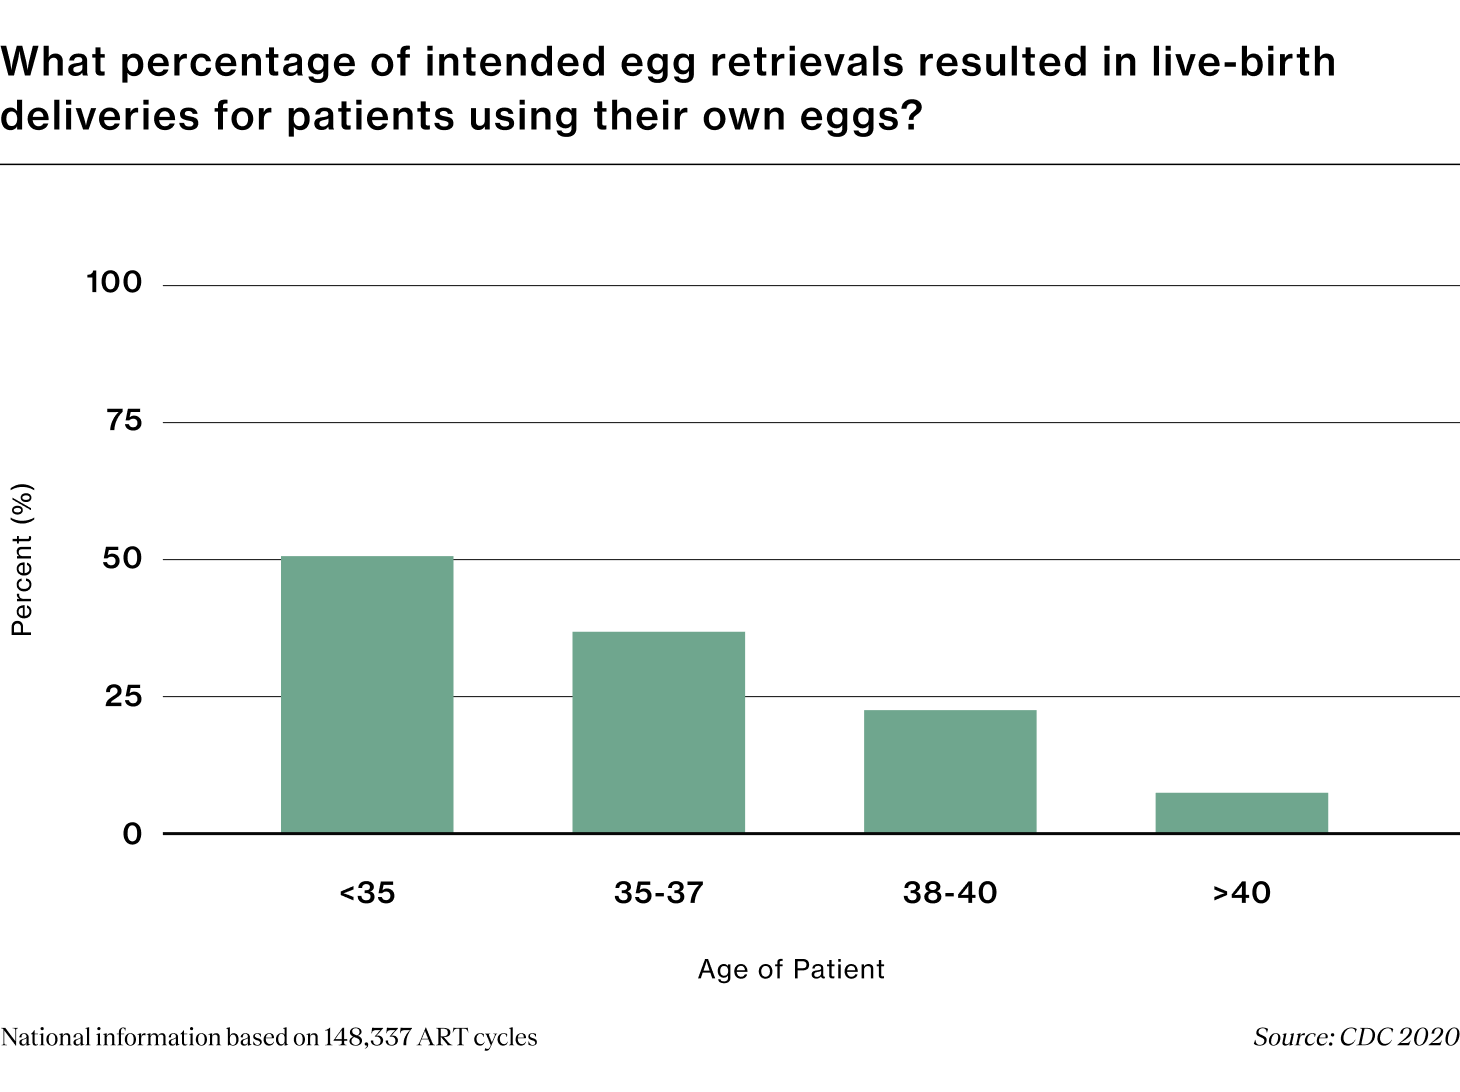 What percentage of intended egg retrievals resulted in live-birth deliveries for patients using their own eggs?